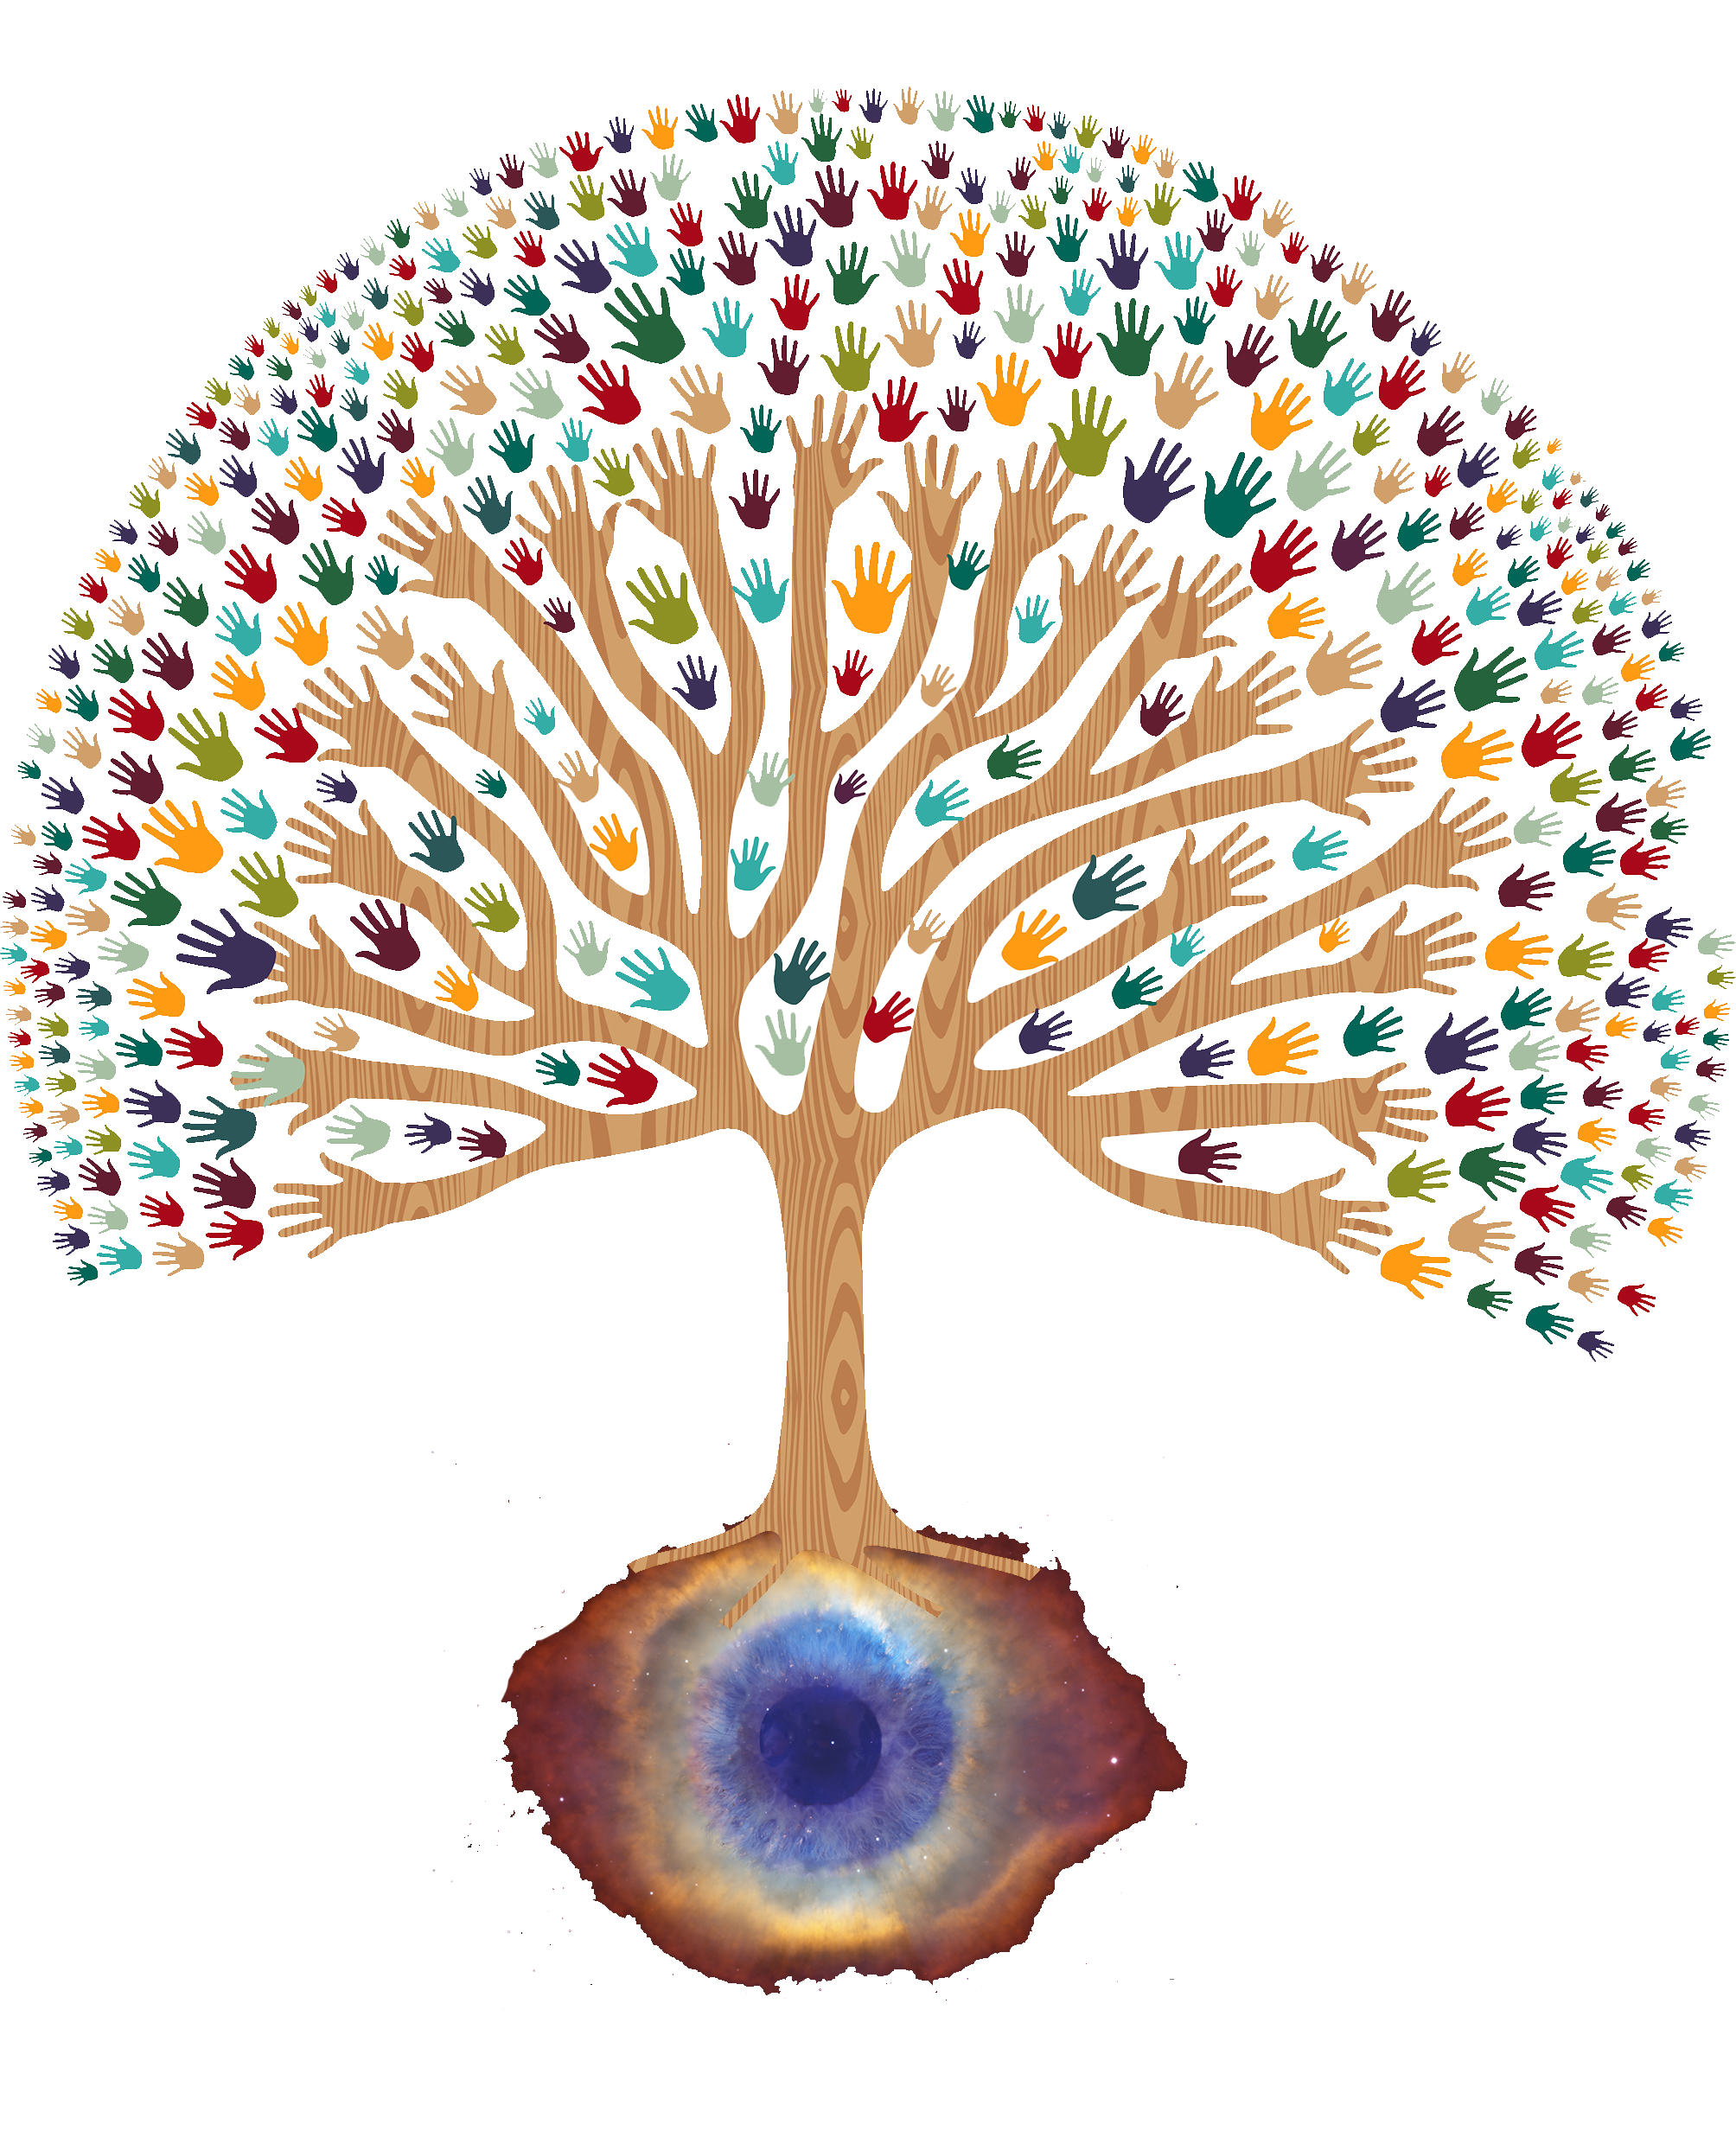 An illustration depicts a wood grained tree with a root ball that resembles an eye. Its branches end in hand shapes and ites leaves are shaped like hands of many different colors.